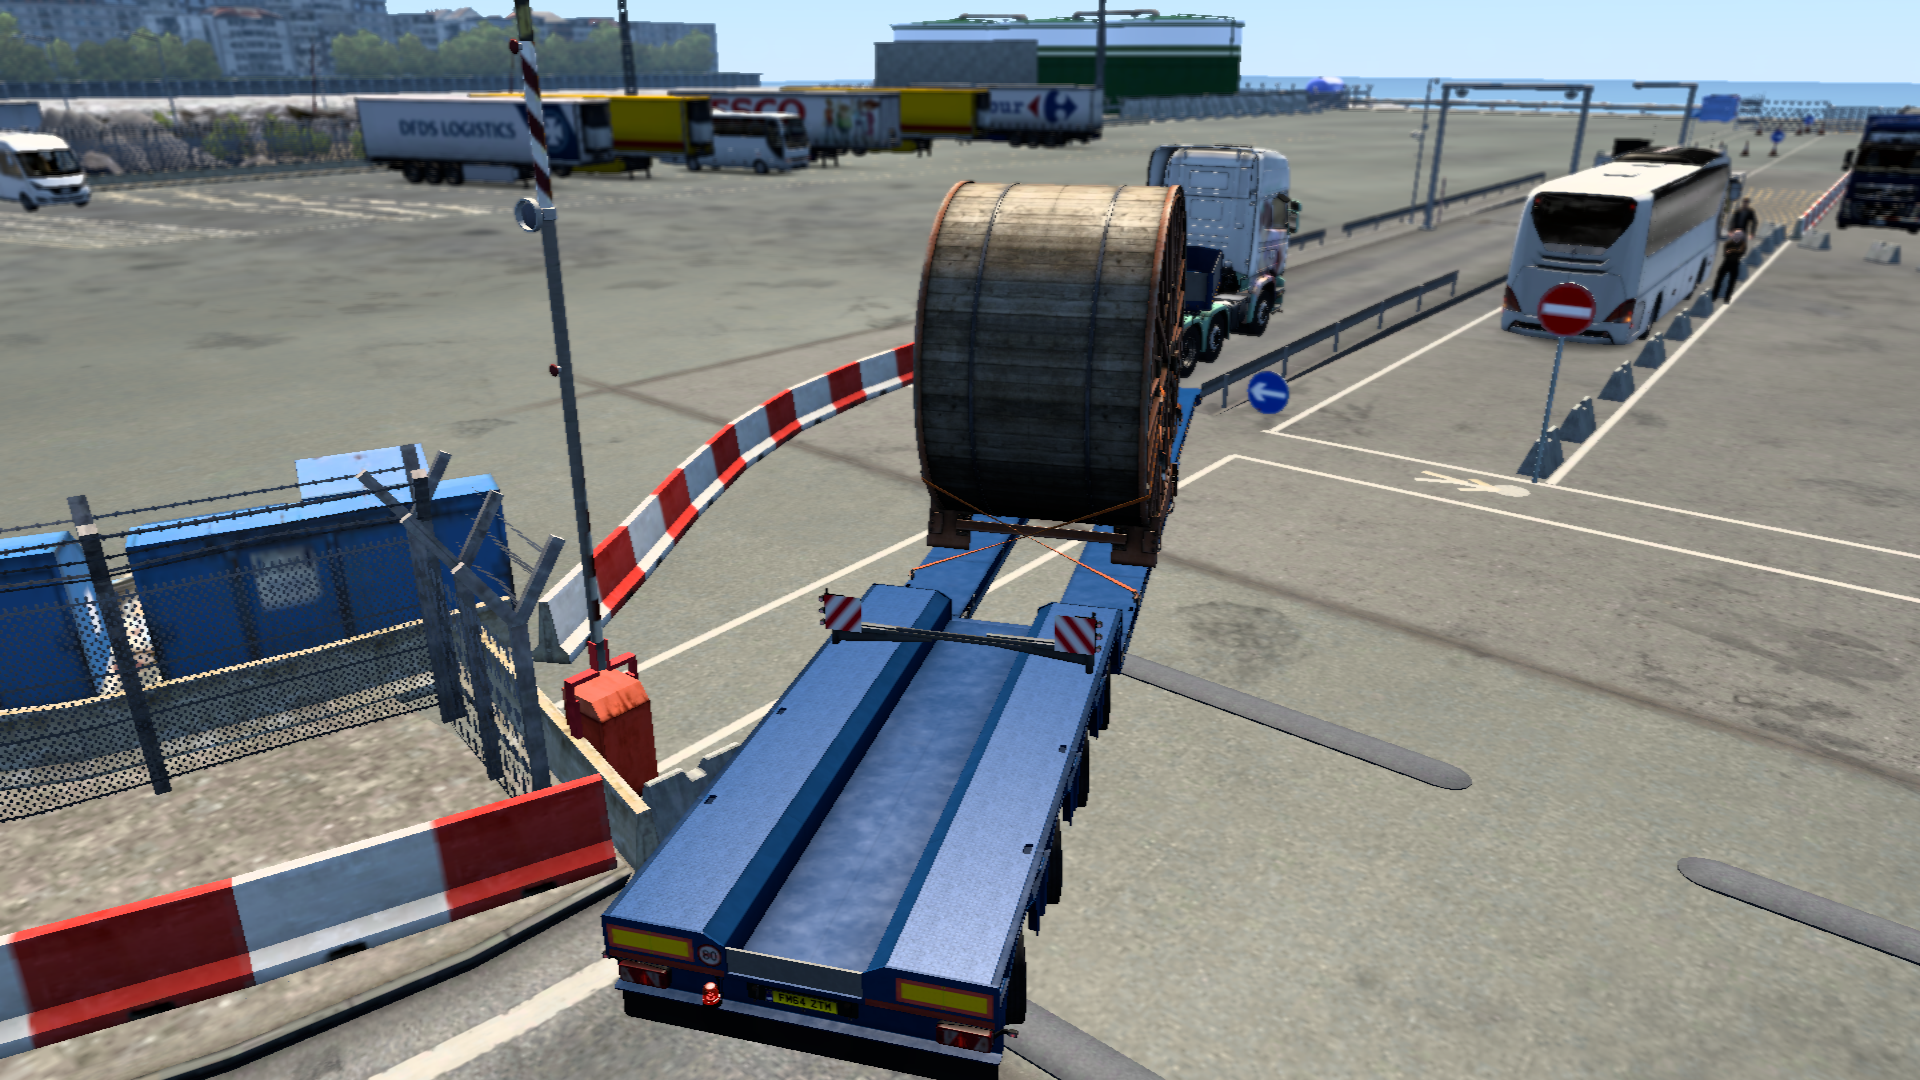 ets2_20211102_232349_00.png